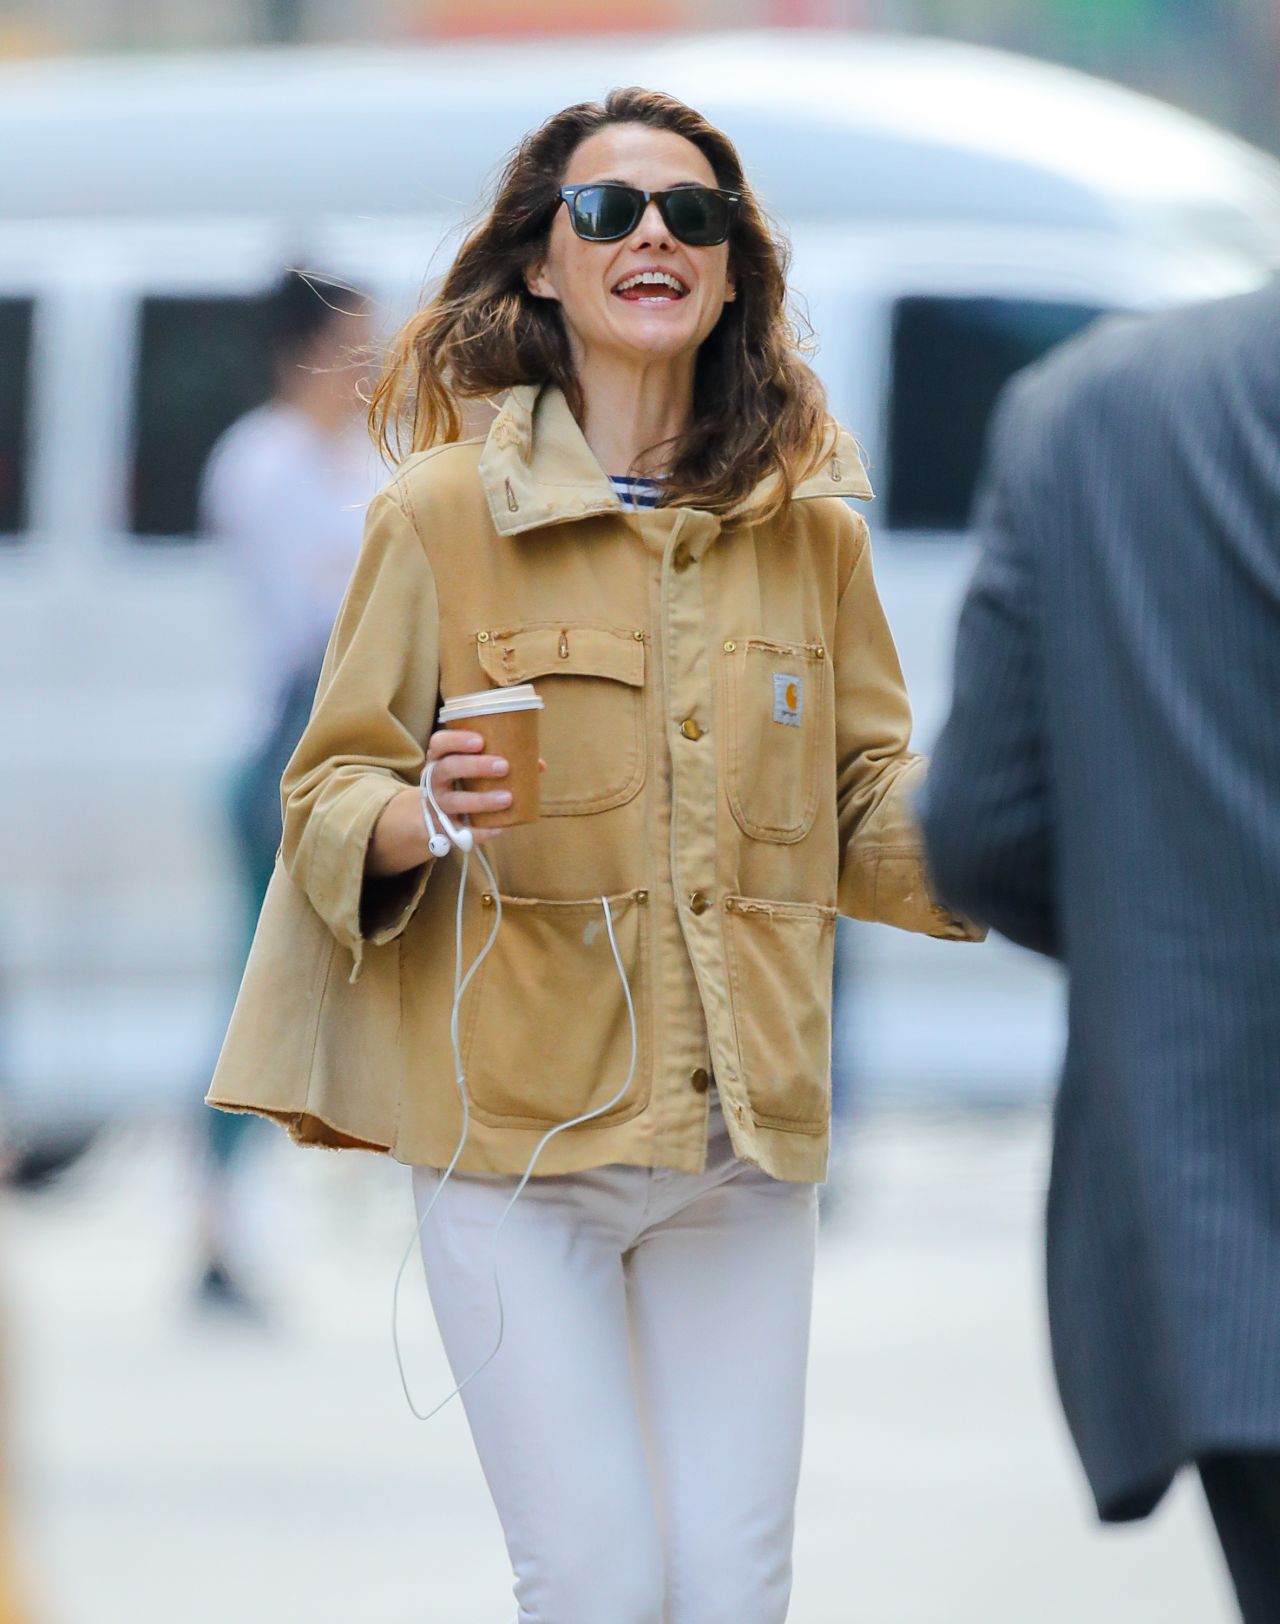 Keri Russell Web on X: 📸 #KeriRussell out in NYC on April 22